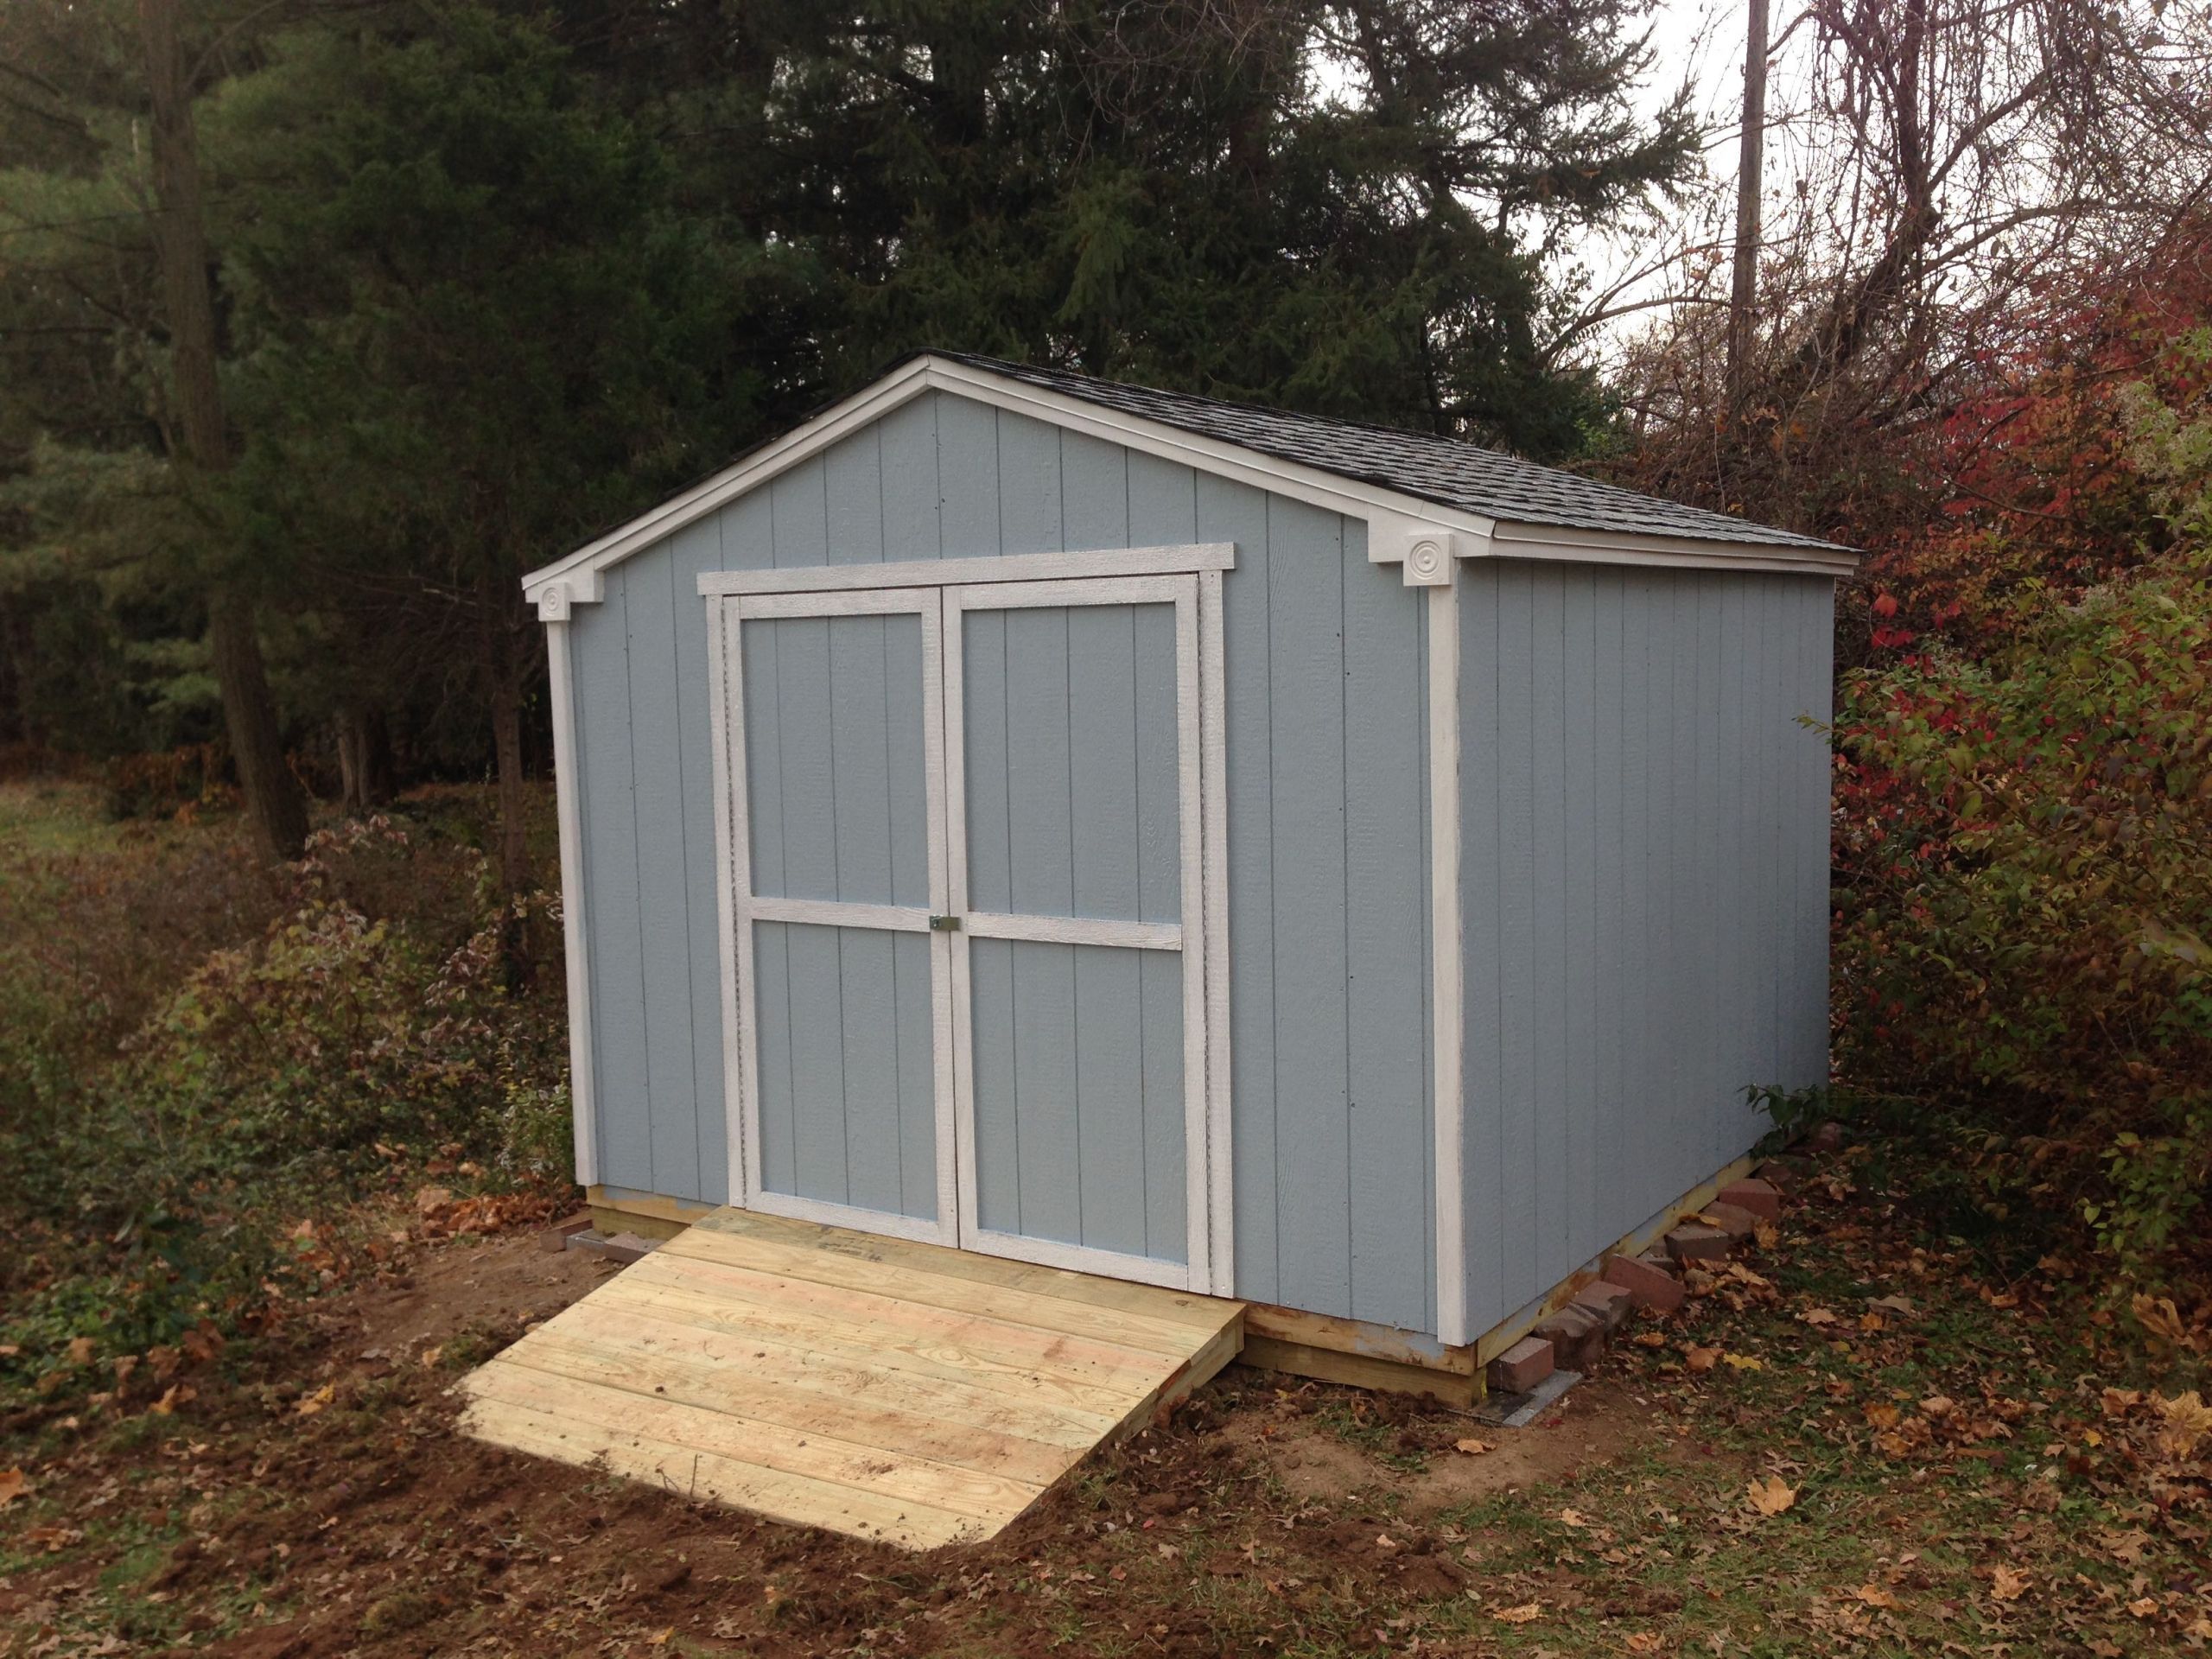 DIY Shed Kit Home Depot
 My pleted "Princeton" Shed kit from Home Depot Ramp